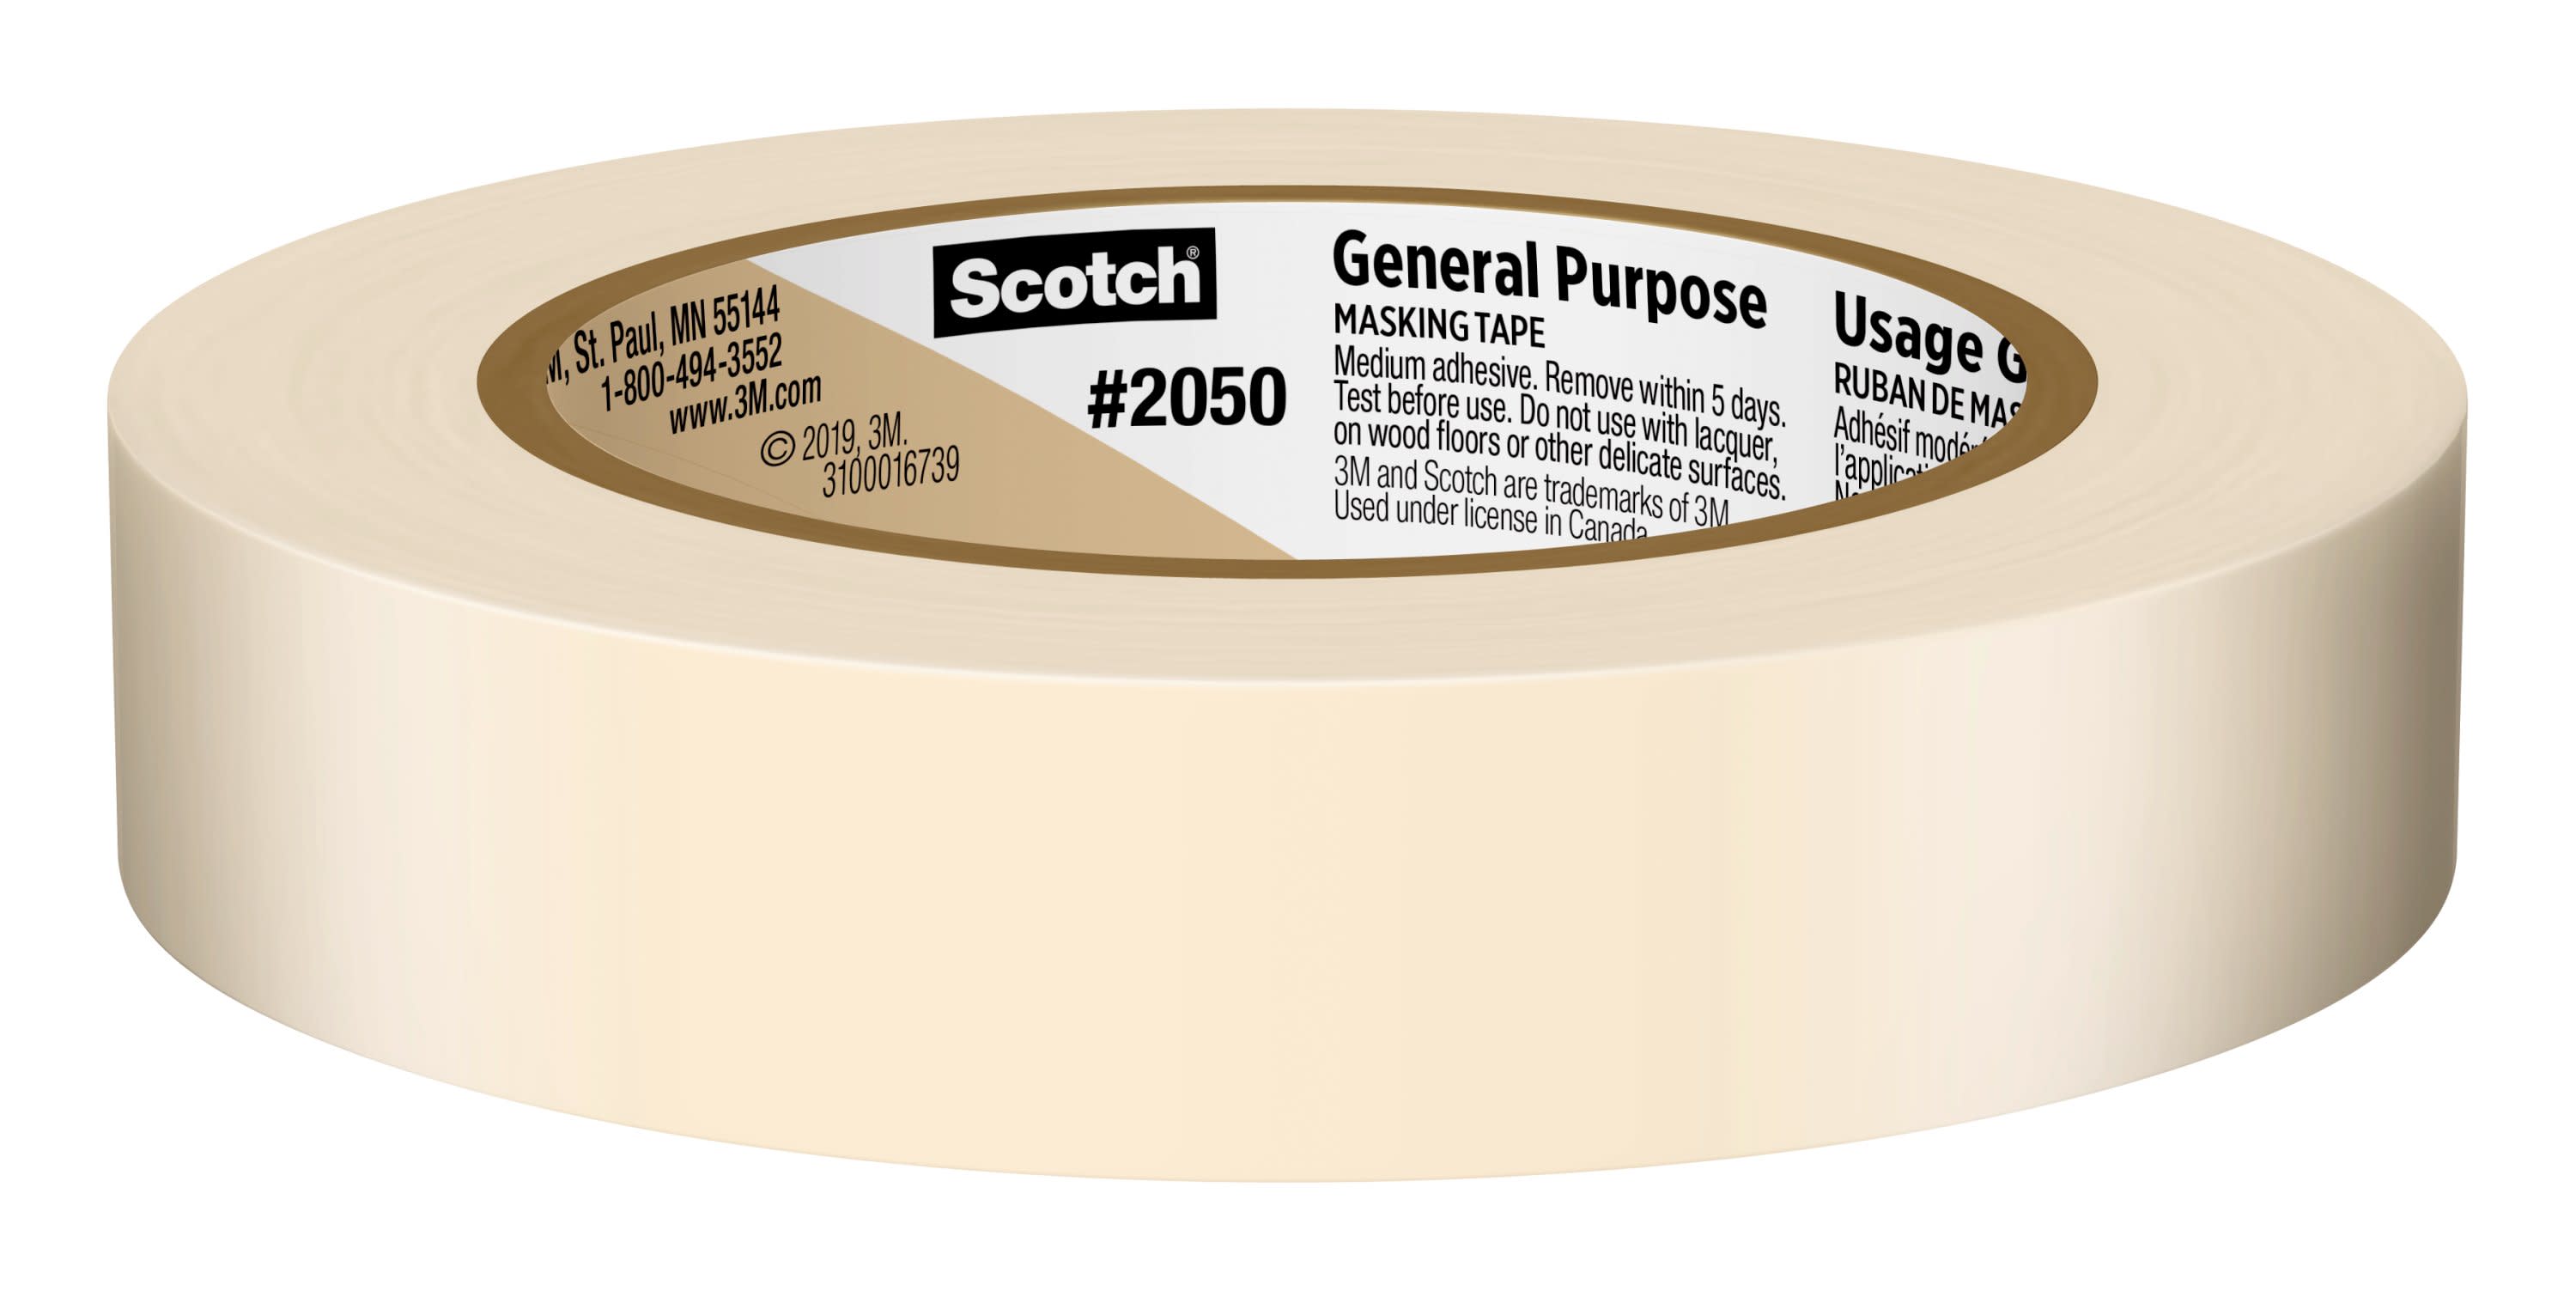 Scotch General Purpose Masking Tape, Tan, 0.94 inches x 60 yards, 1 Roll